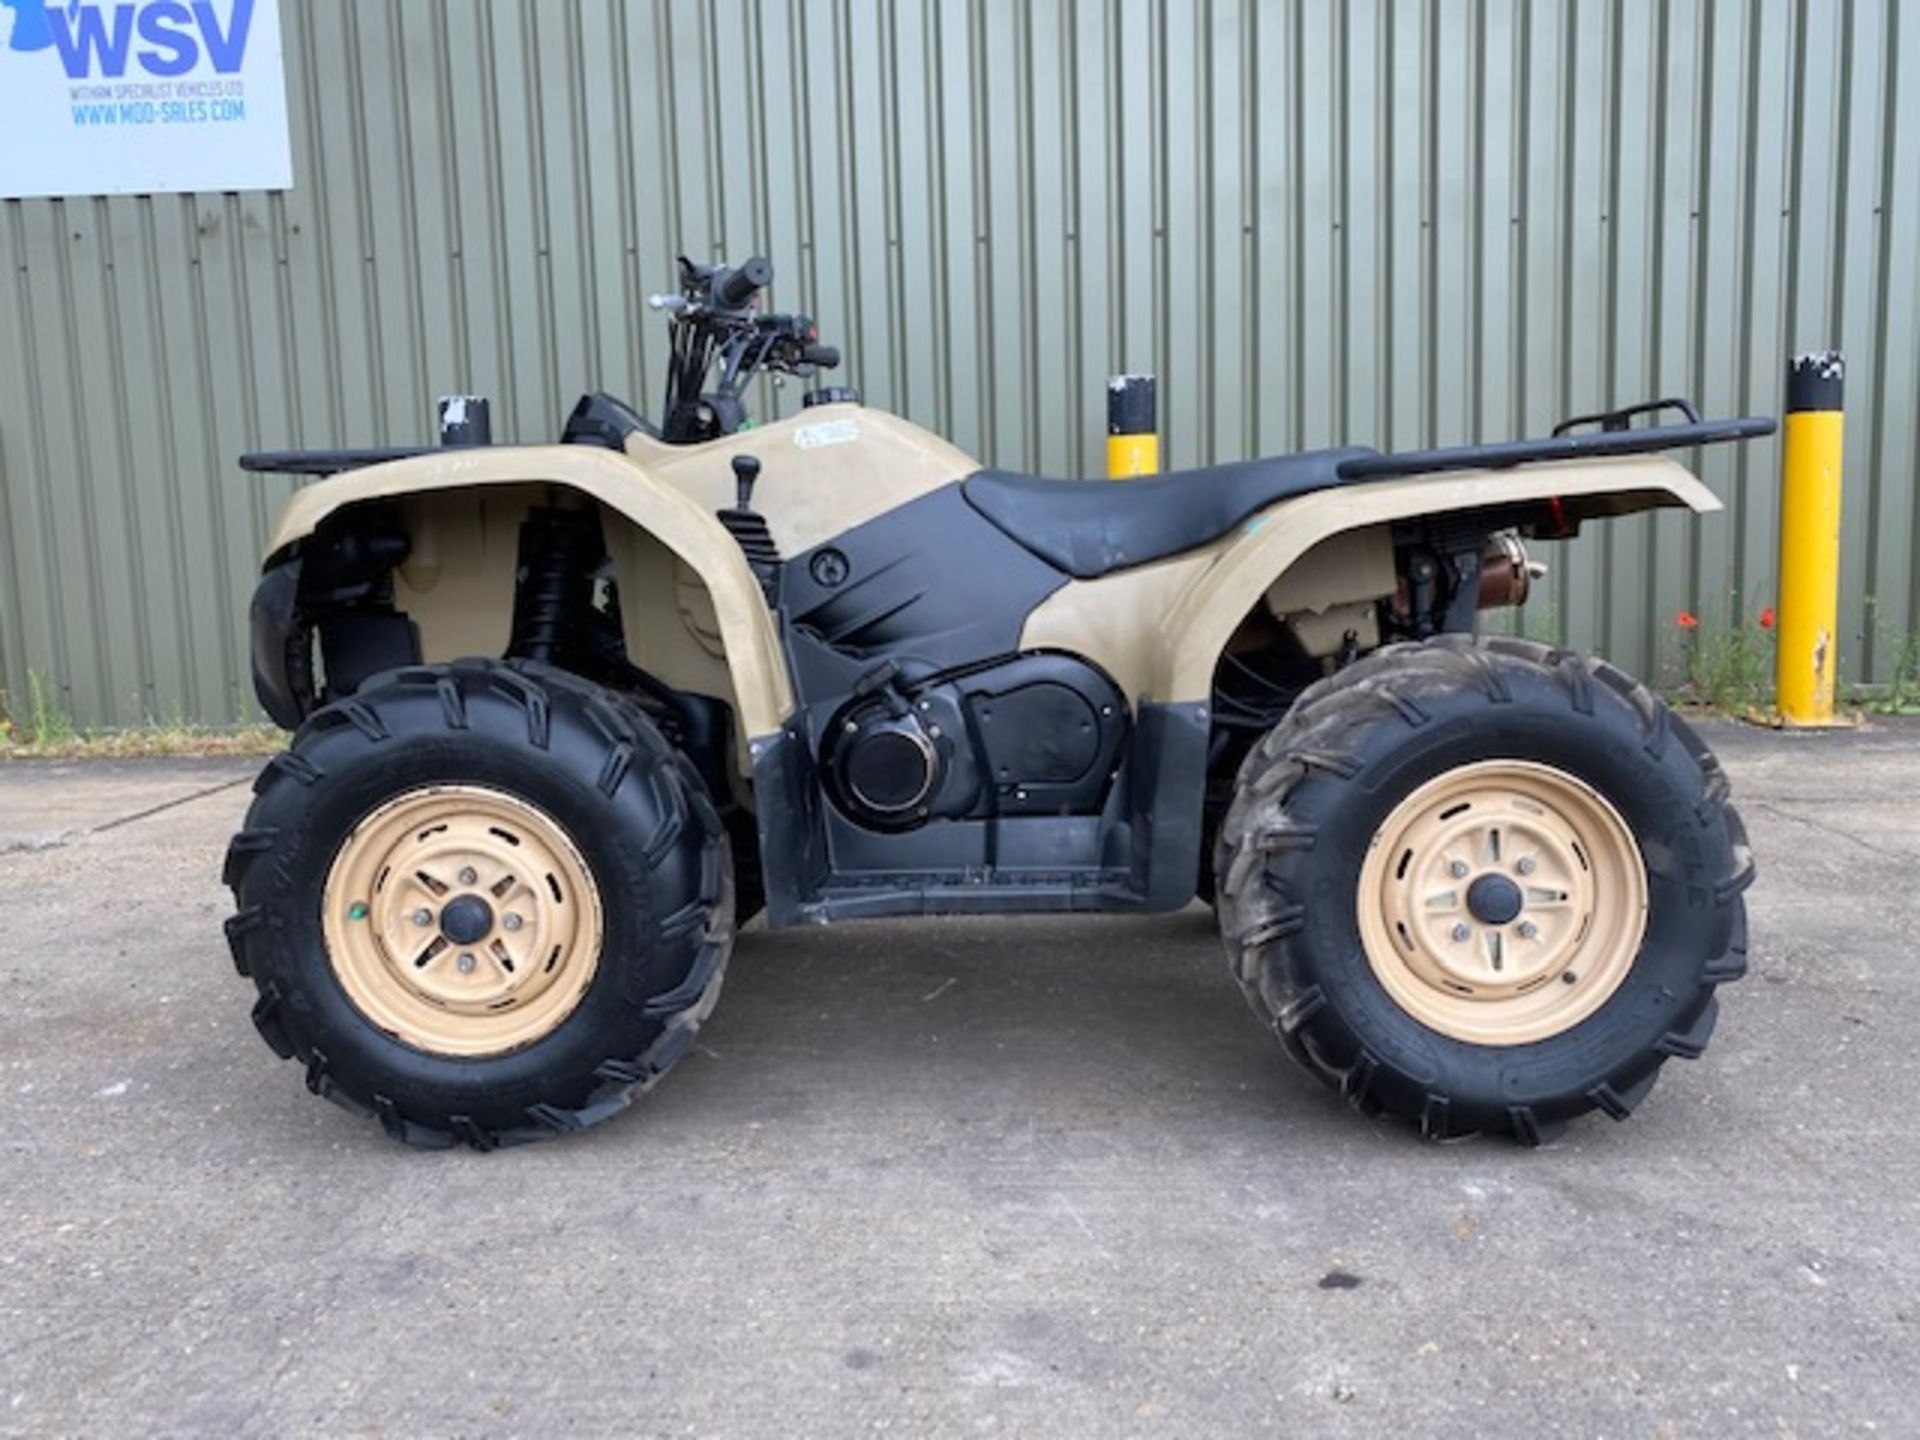 Military Specification Yamaha Grizzly 450 4 x 4 ATV Quad Bike ONLY 5,539Km!!! - Image 5 of 26